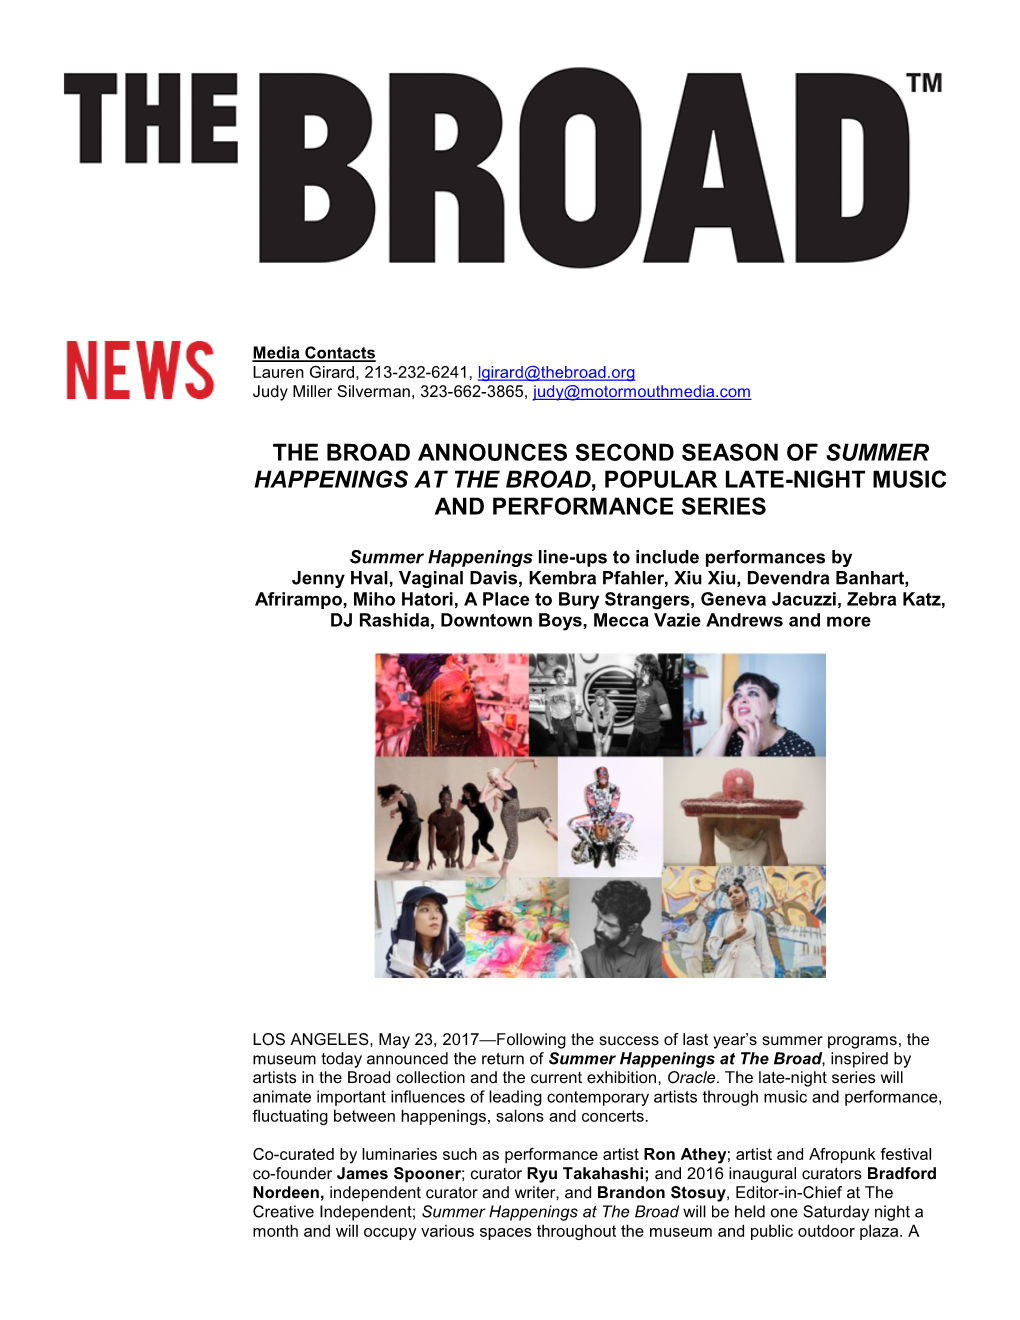 The Broad Announces Second Season of Summer Happenings at the Broad, Popular Late-Night Music and Performance Series